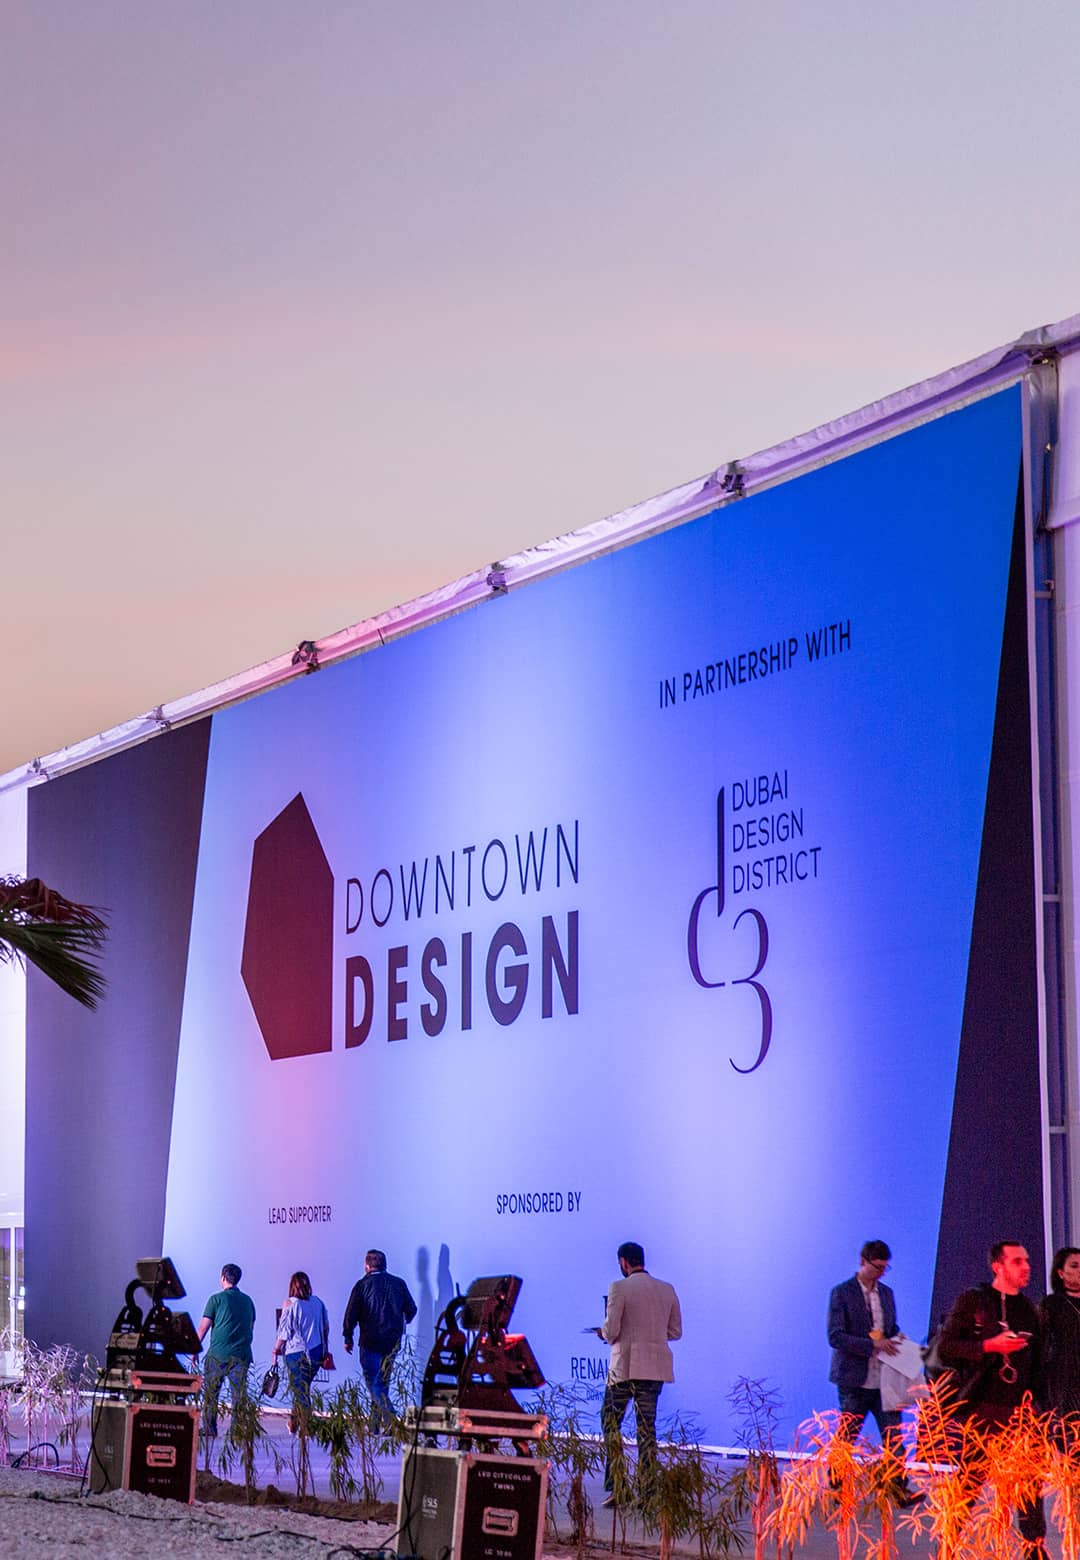 Downtown Design 2021 returns to scenic d3 Waterfront venue